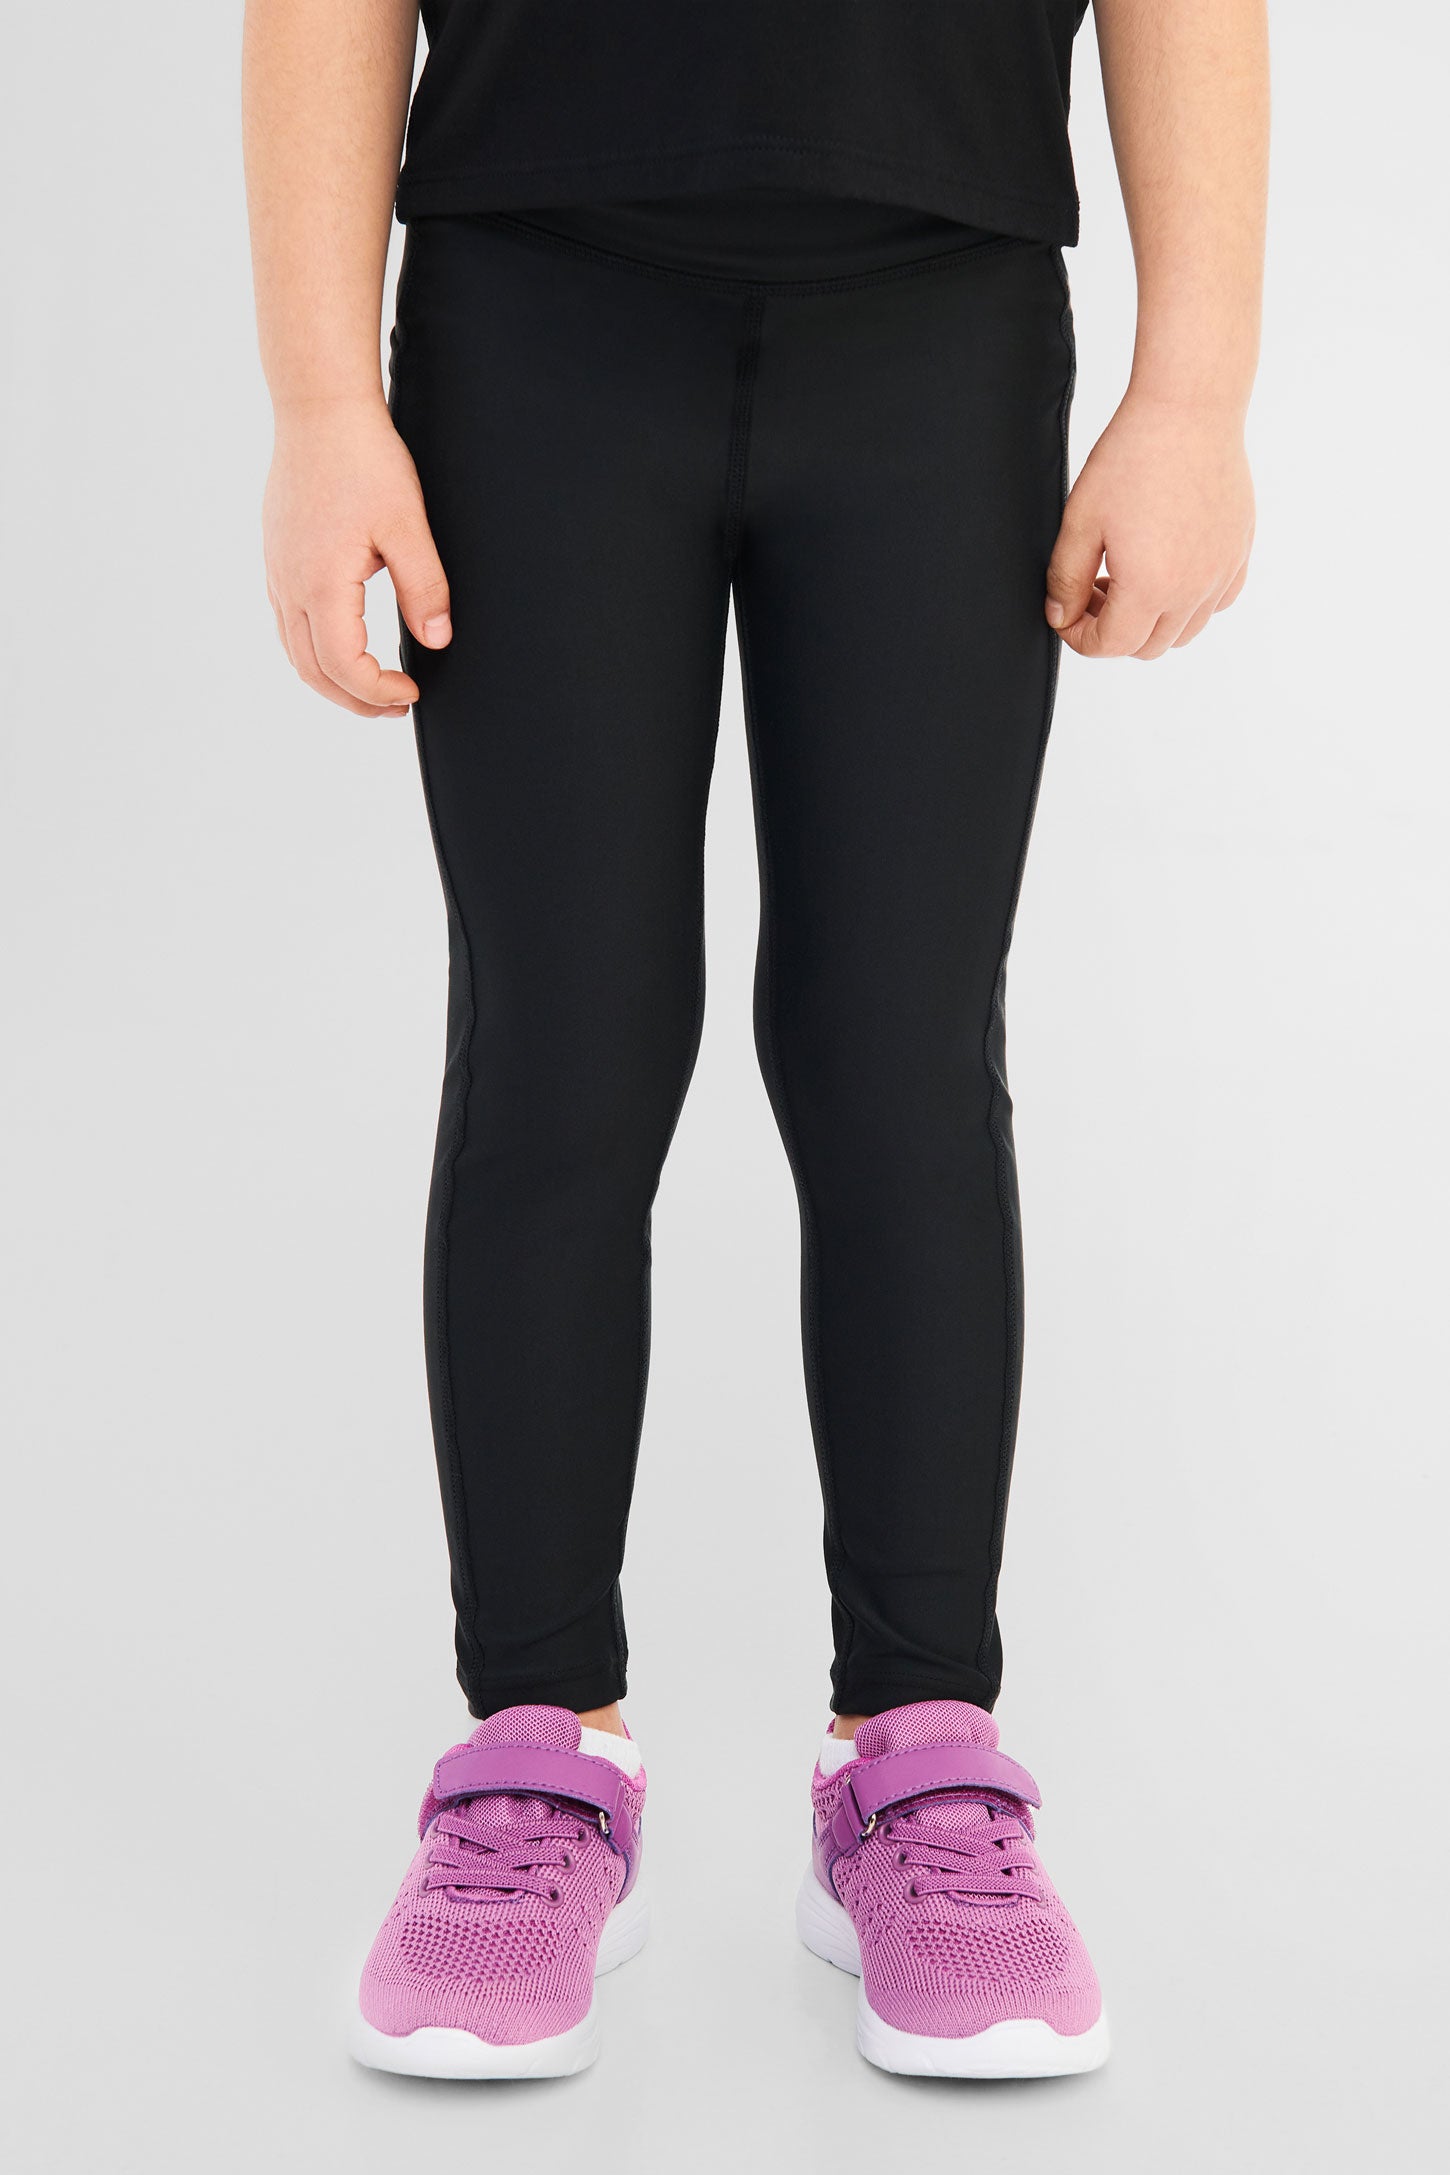 Wholesale GIRLS-ATHLETIC LEGGING/23215-YUYB for your store - Faire